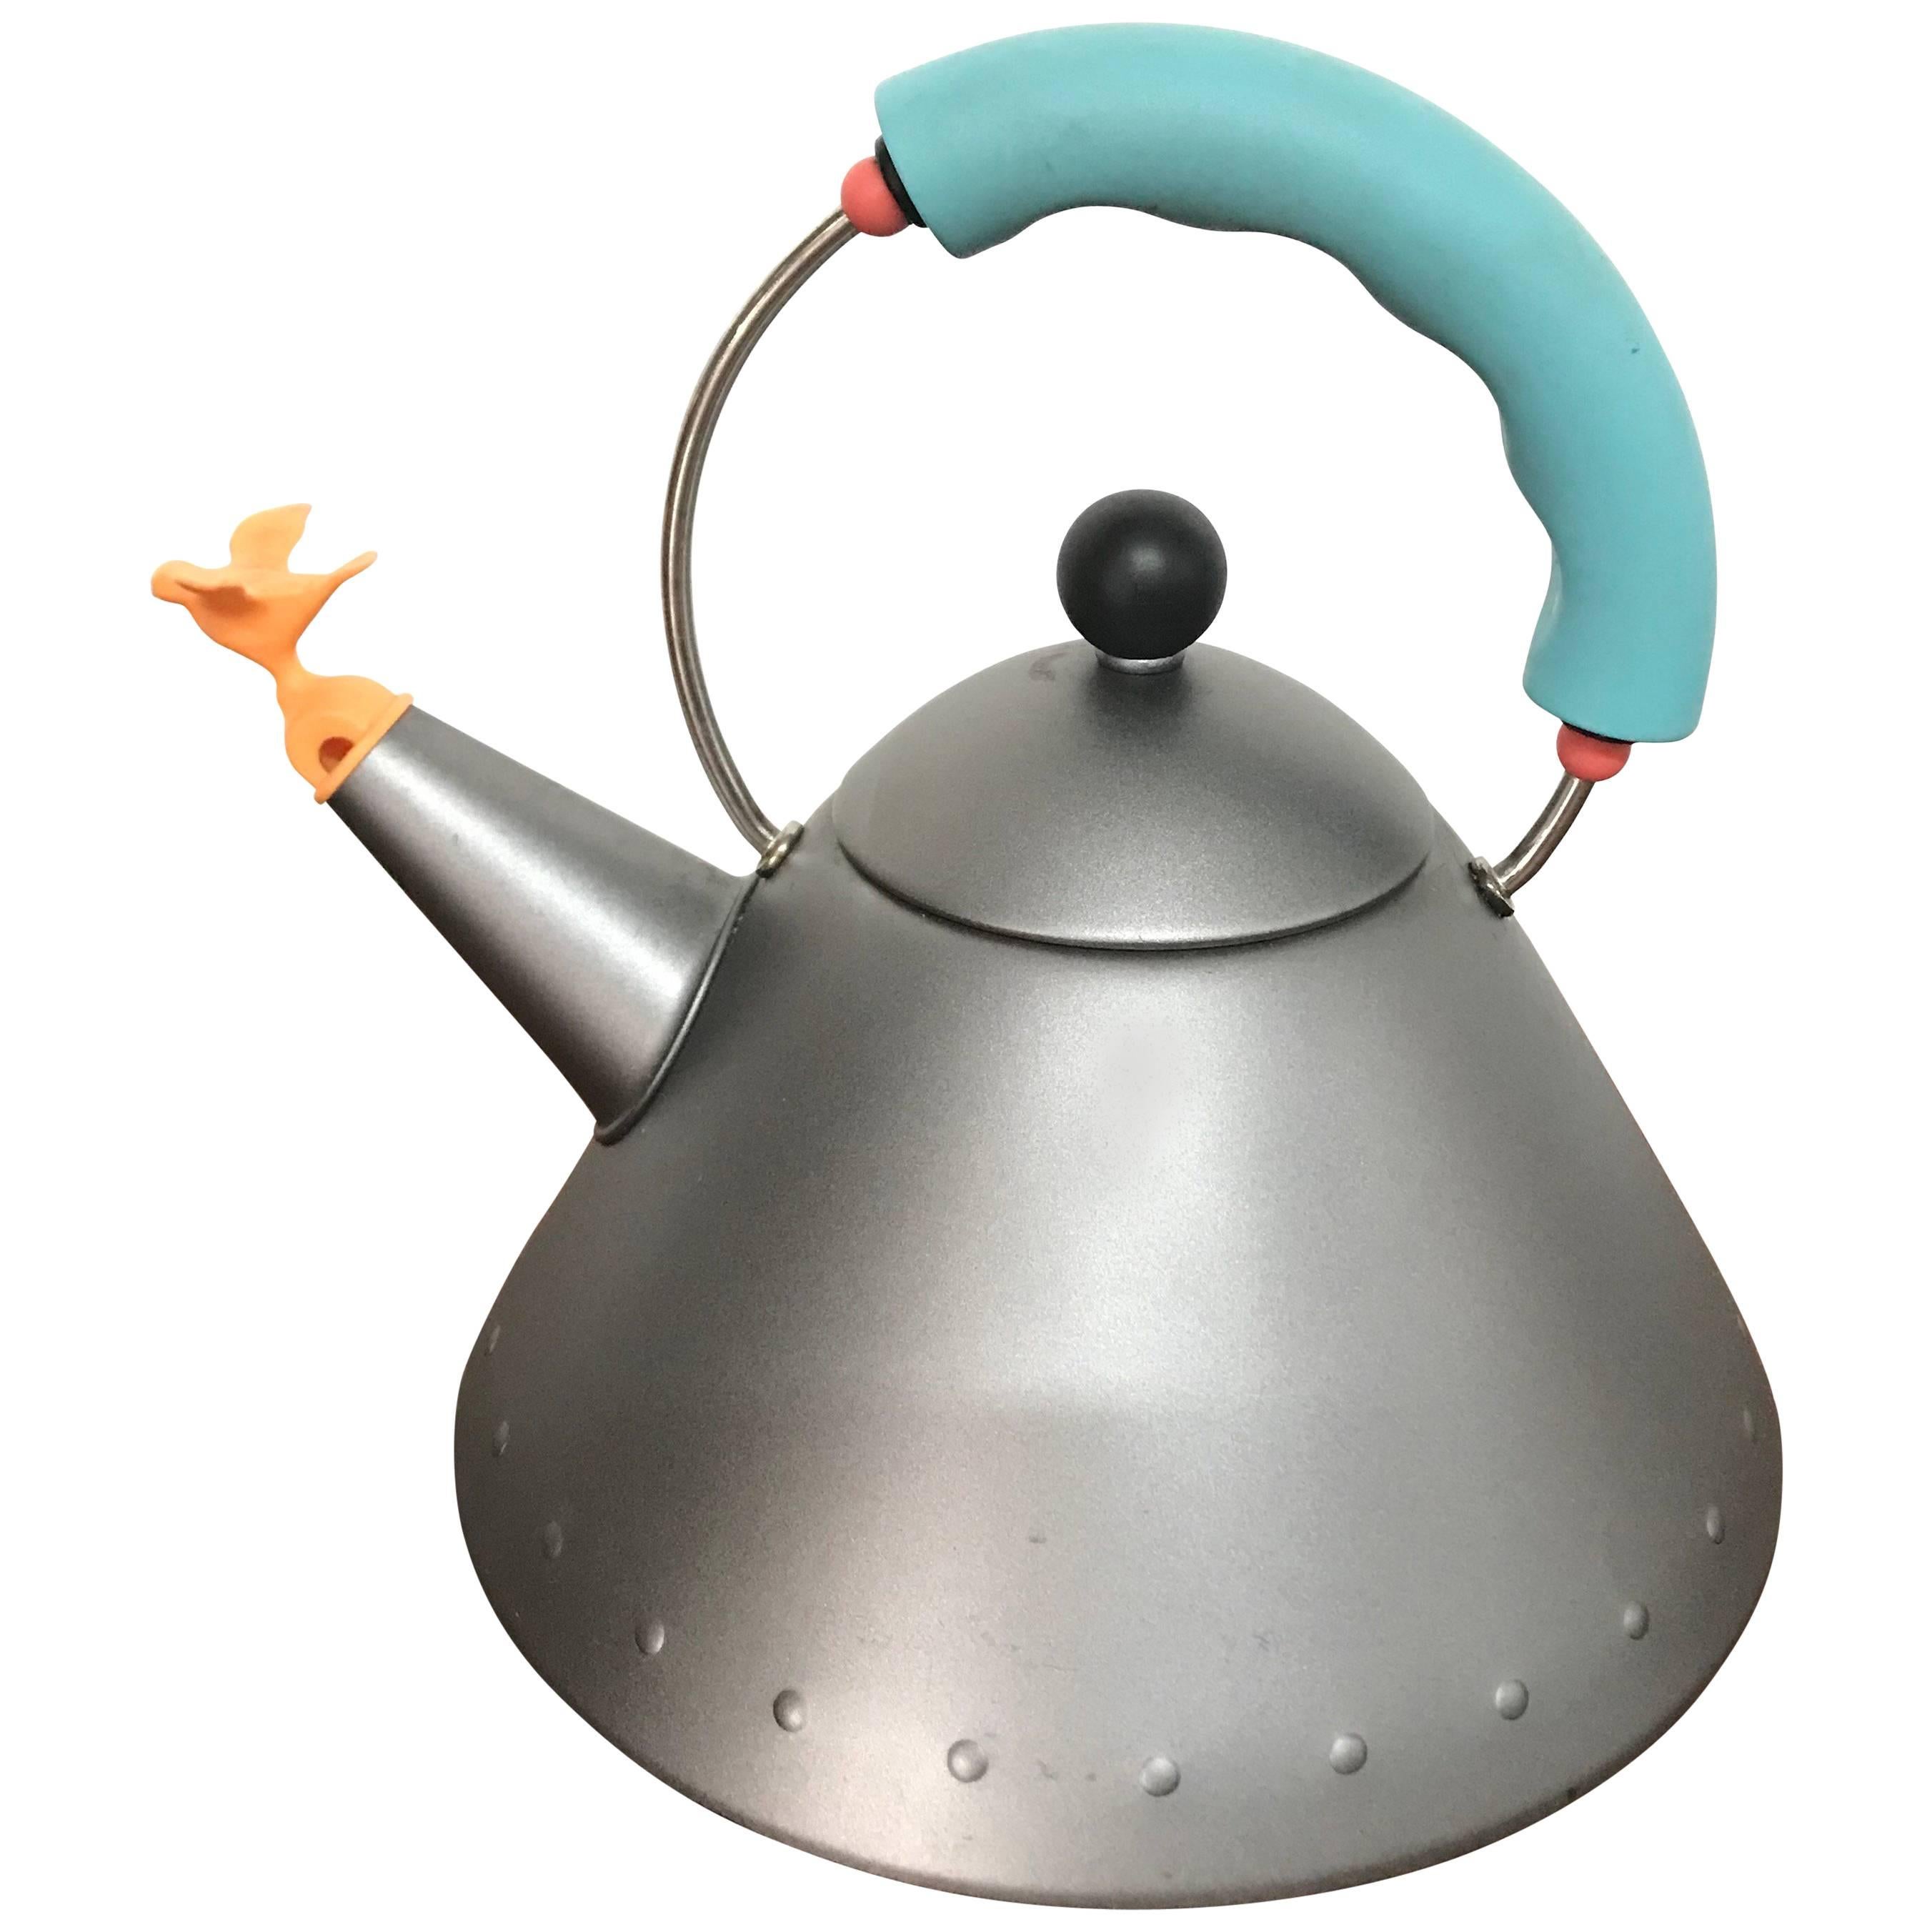 Postmodern Tea Kettle “9093 Kettle” by Michael Graves for Alessi